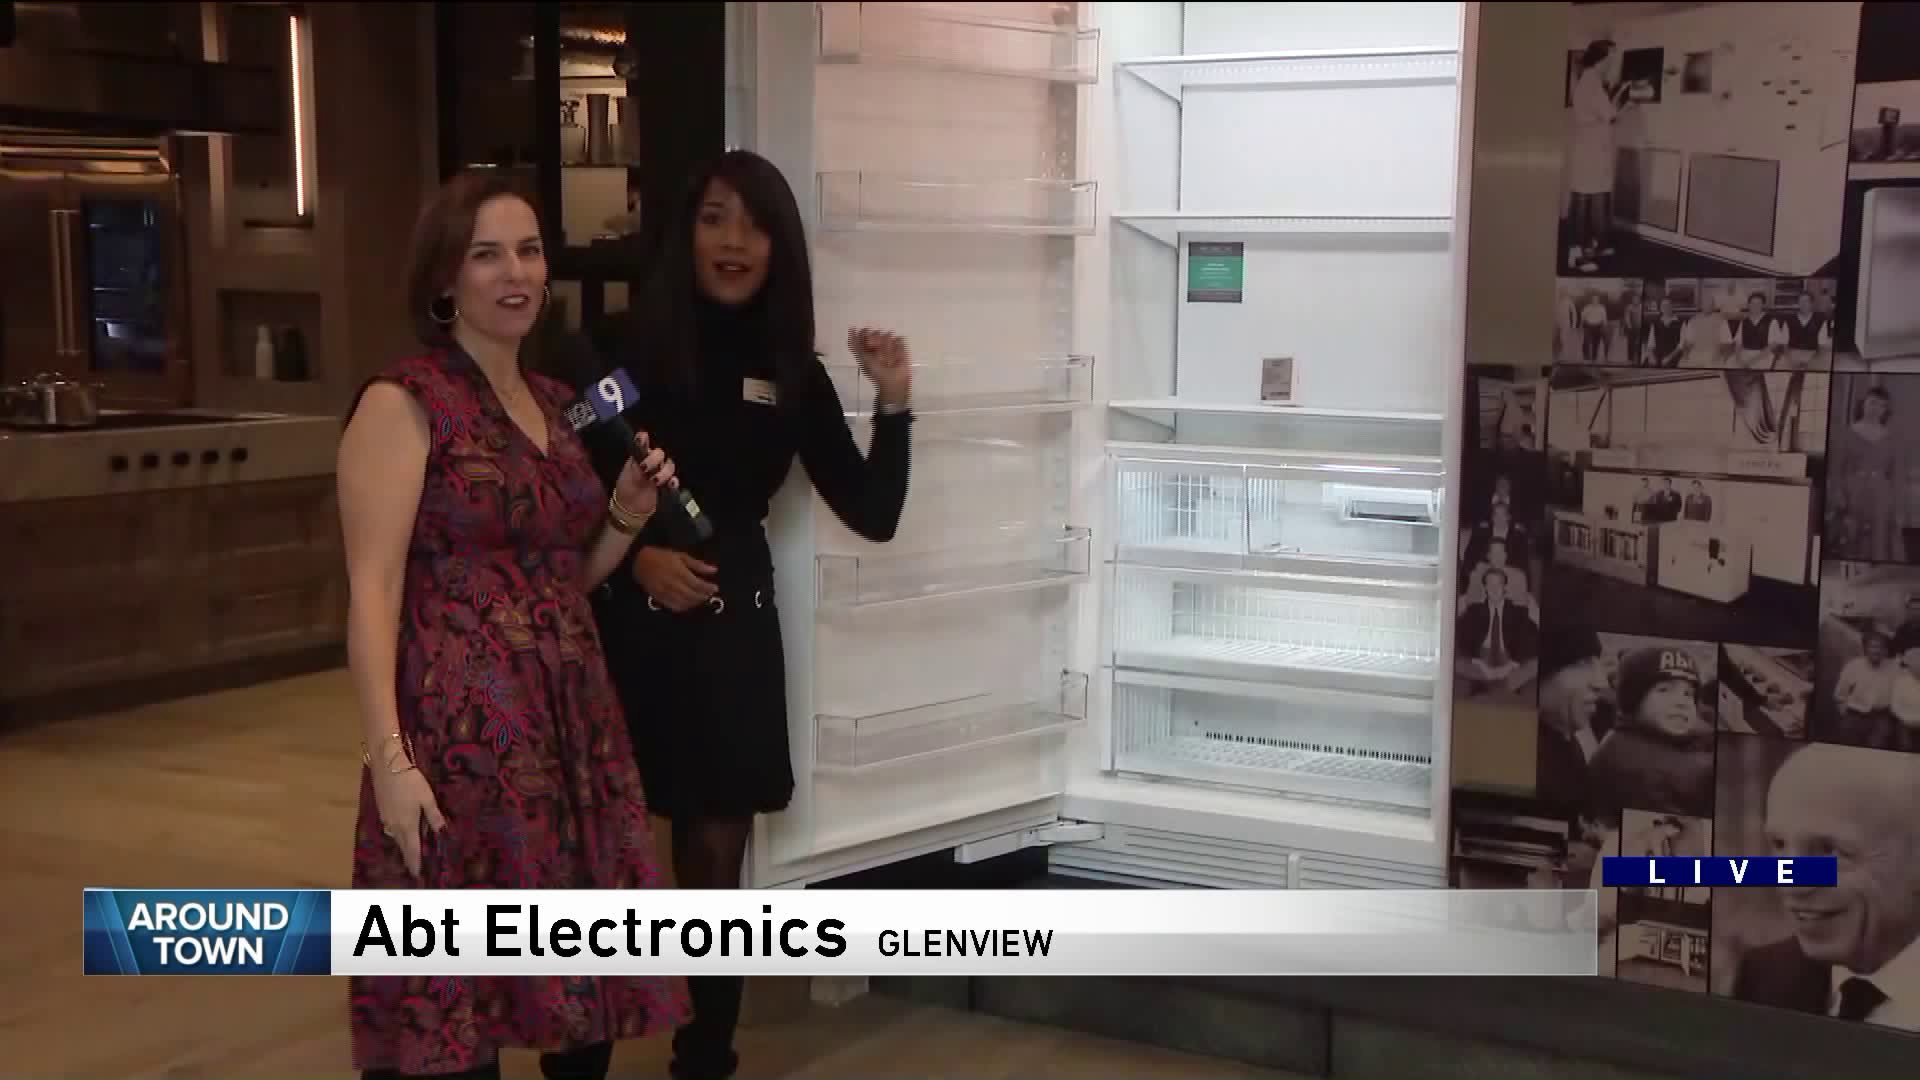 Around Town previews new gadgets at Abt Electronics